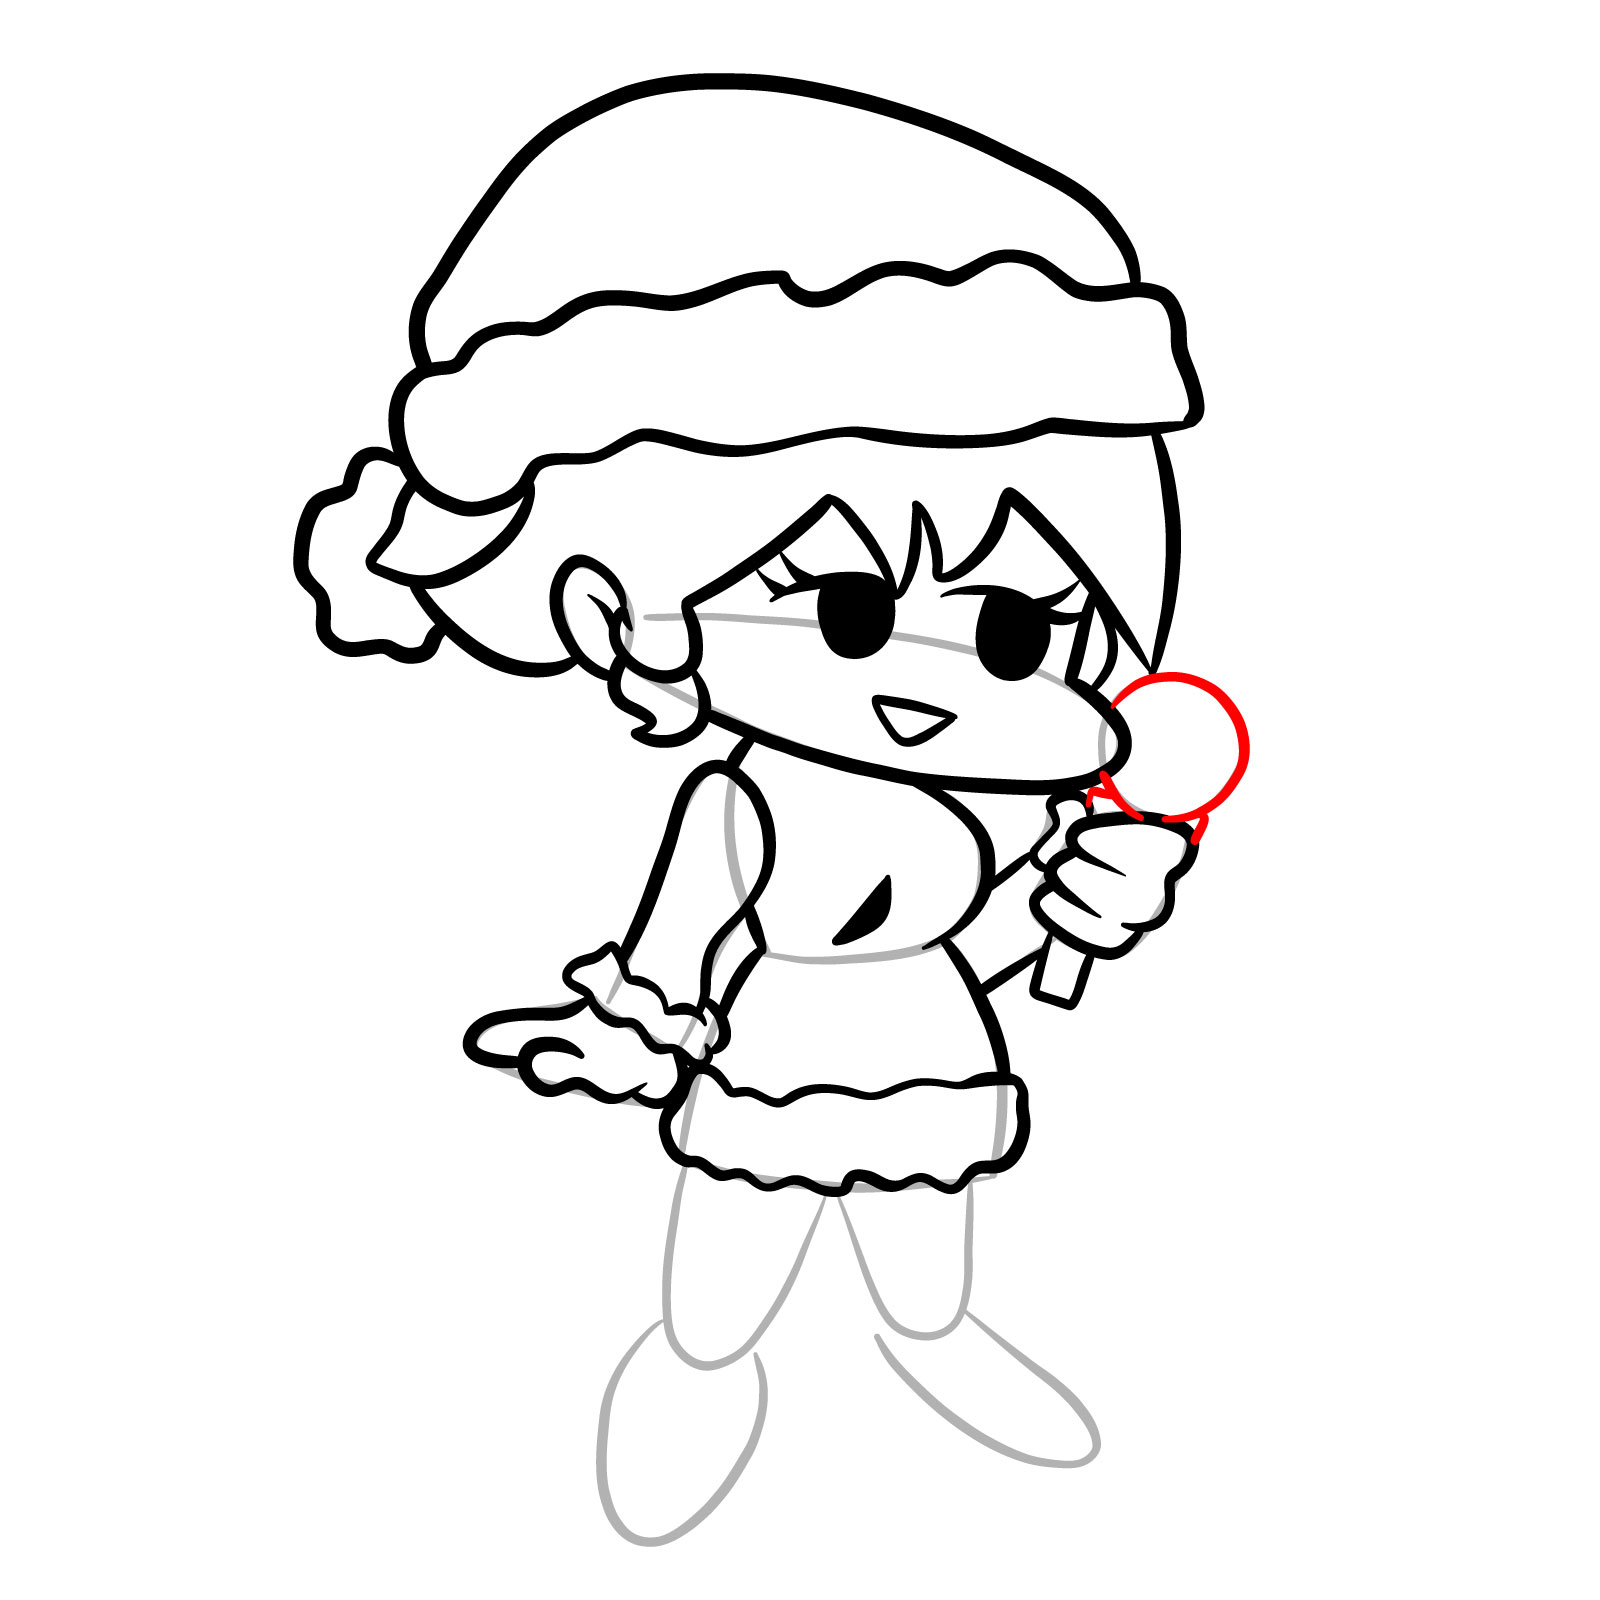 How to draw standing Santa GF - step 20